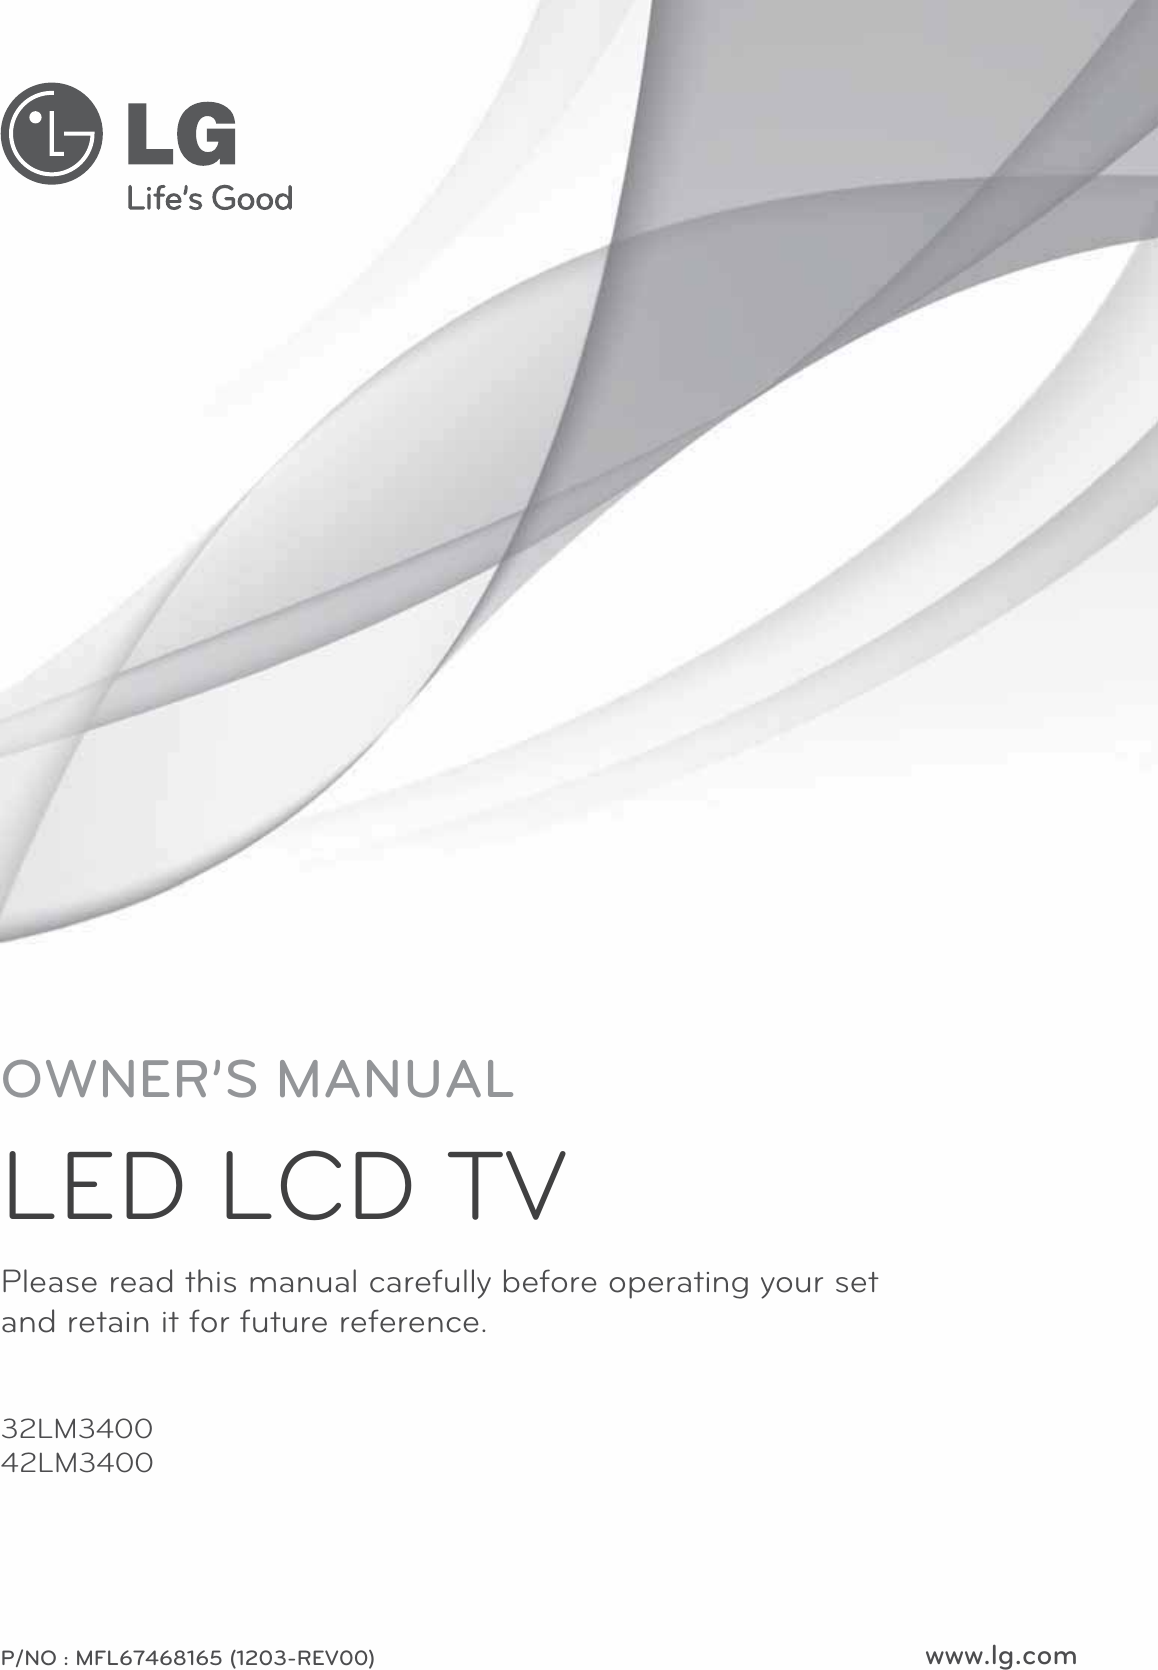 www.lg.comPlease read this manual carefully before operating your set  and retain it for future reference.P/NO : MFL67468165 (1203-REV00)OWNER’S MANUALLED LCD TV32LM340042LM3400